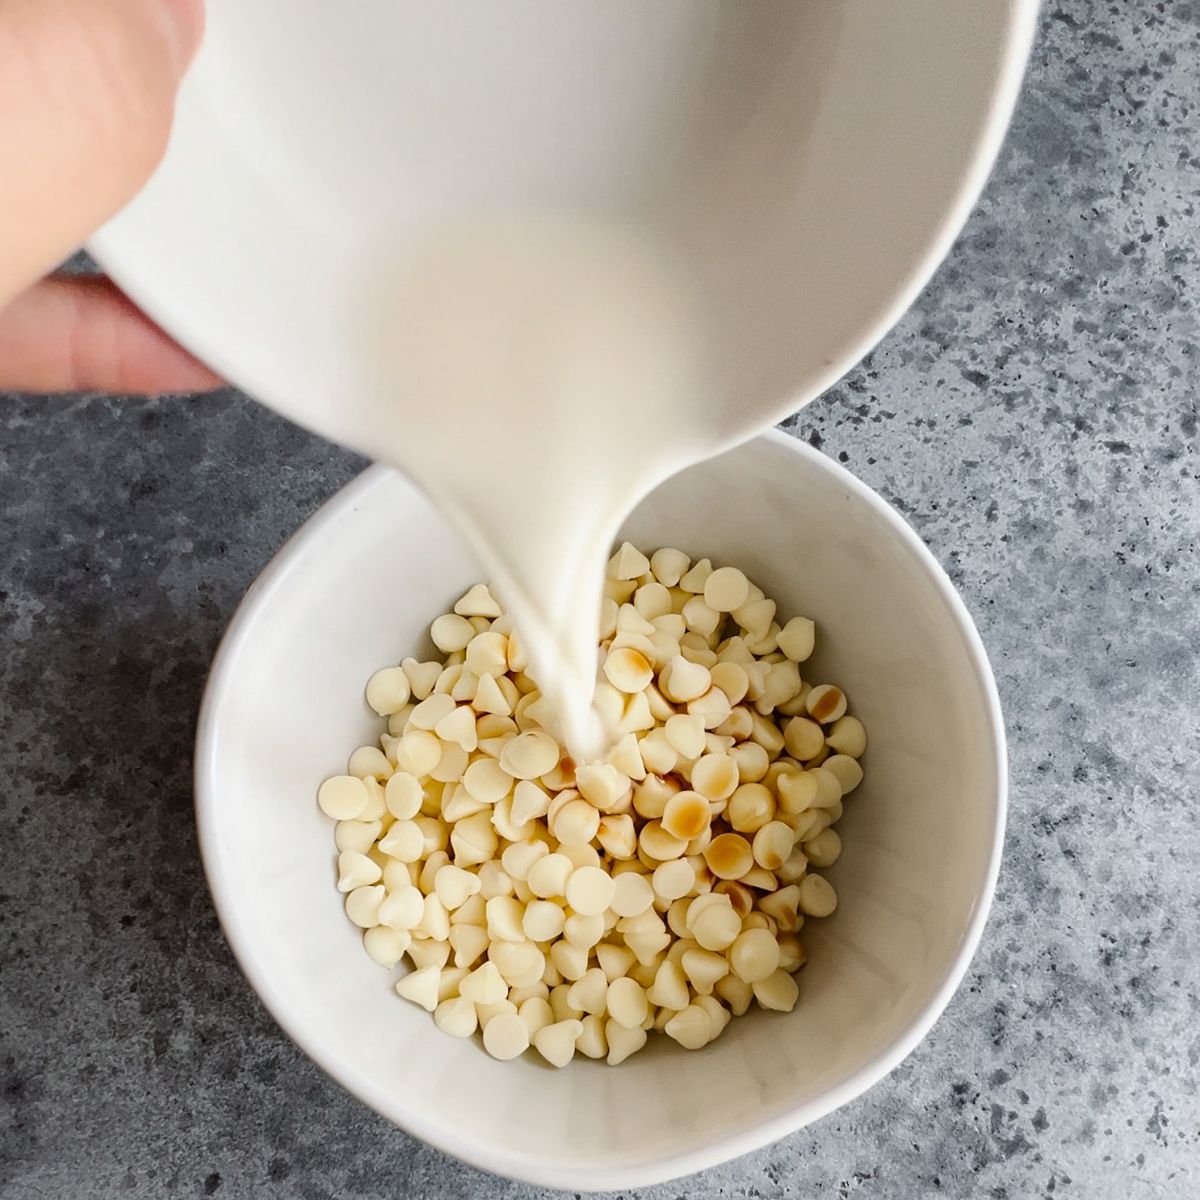 Pouring milk into a bowl of white chocolate chips.